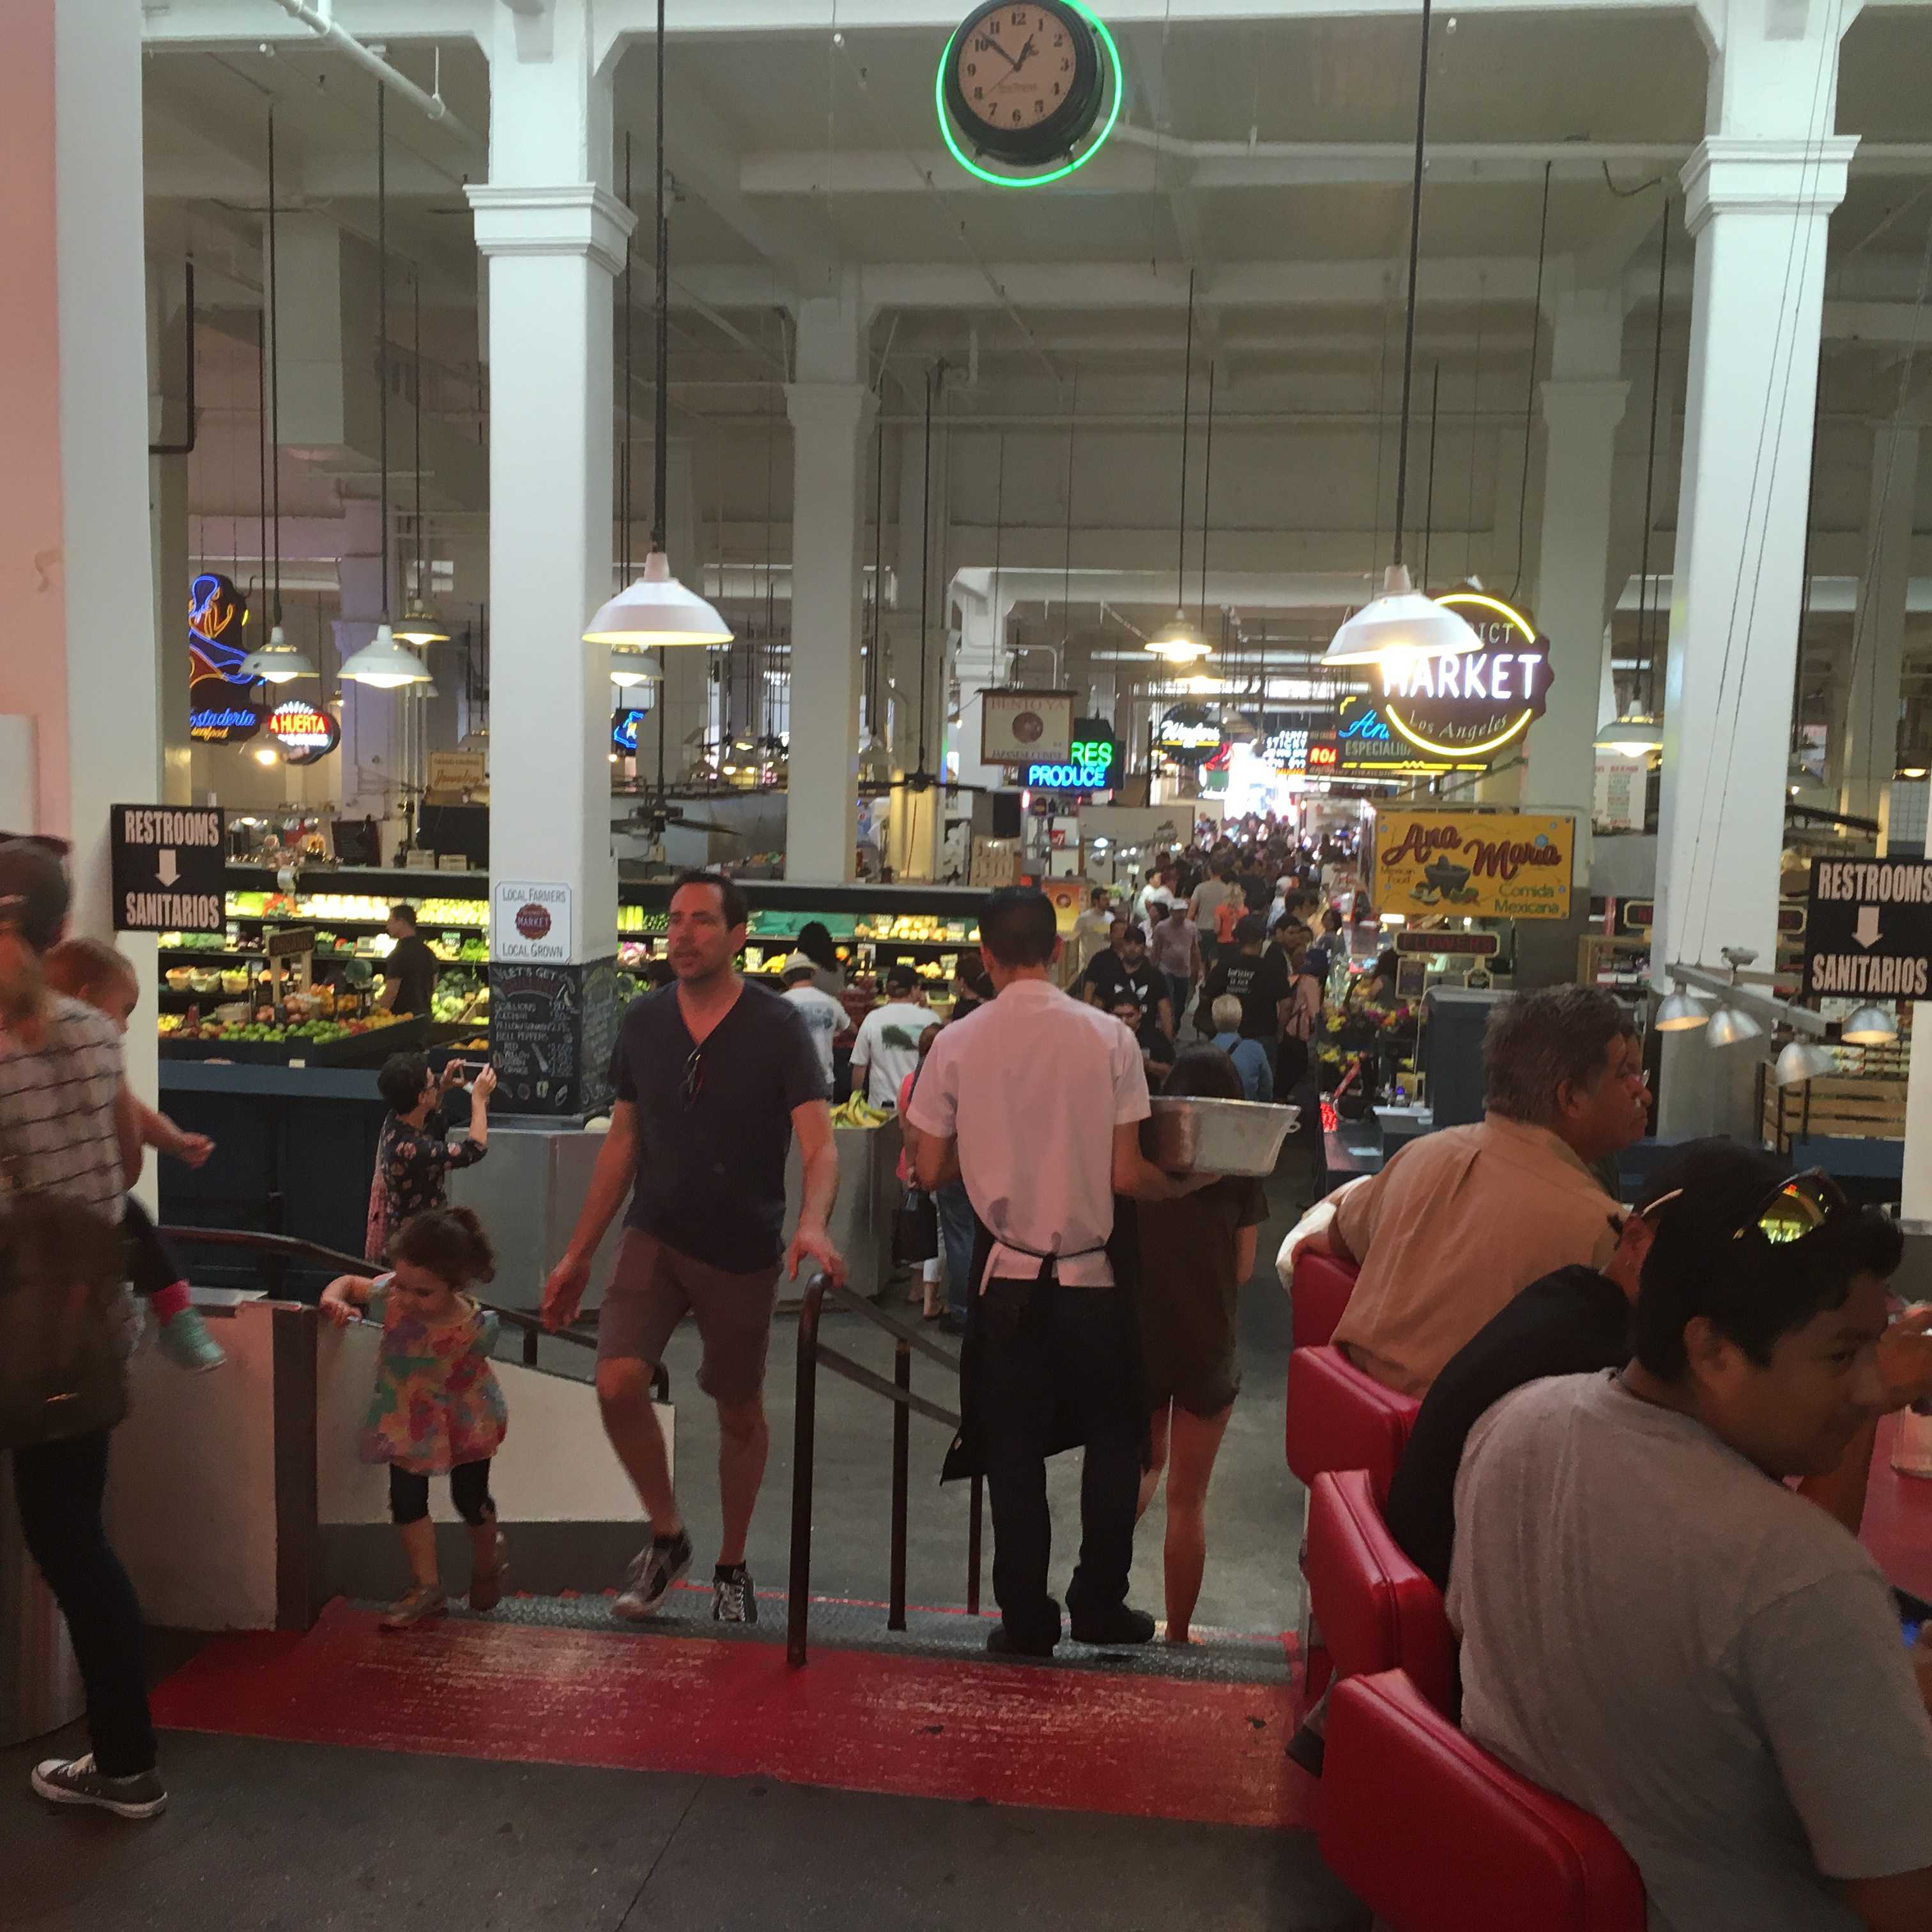 Grand Central has become home to trendy food vendors. (Dede Ogbueze/The Sundial)